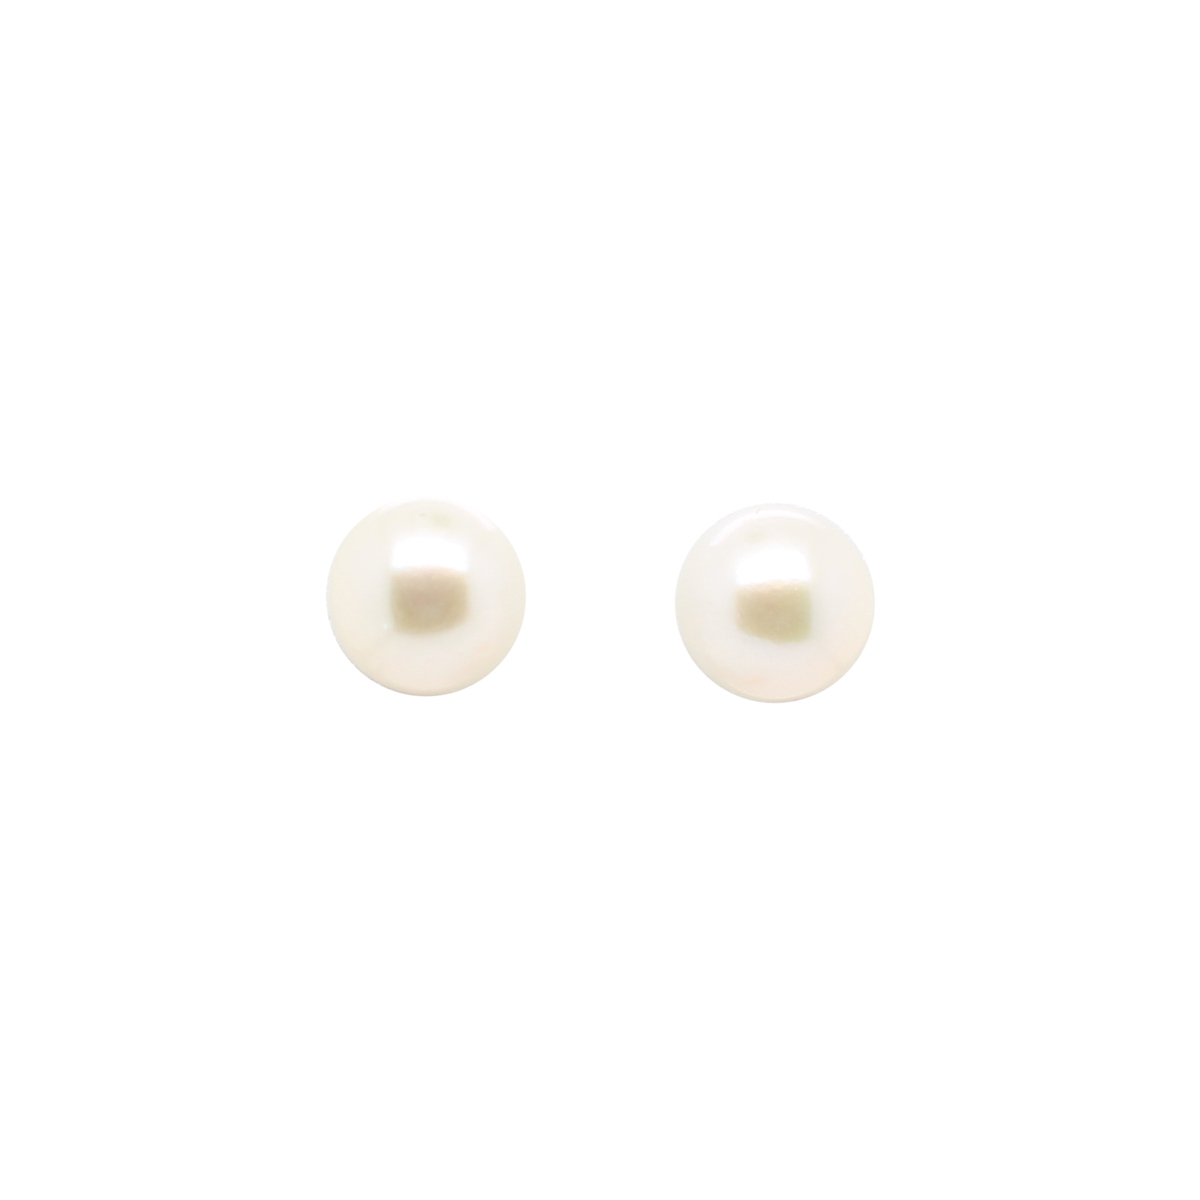 14 Karat White Gold Freshwater Cultured Pearl Earrings  Each Earring Contains One Pearl Measuring 6-7mm  AAA Quality